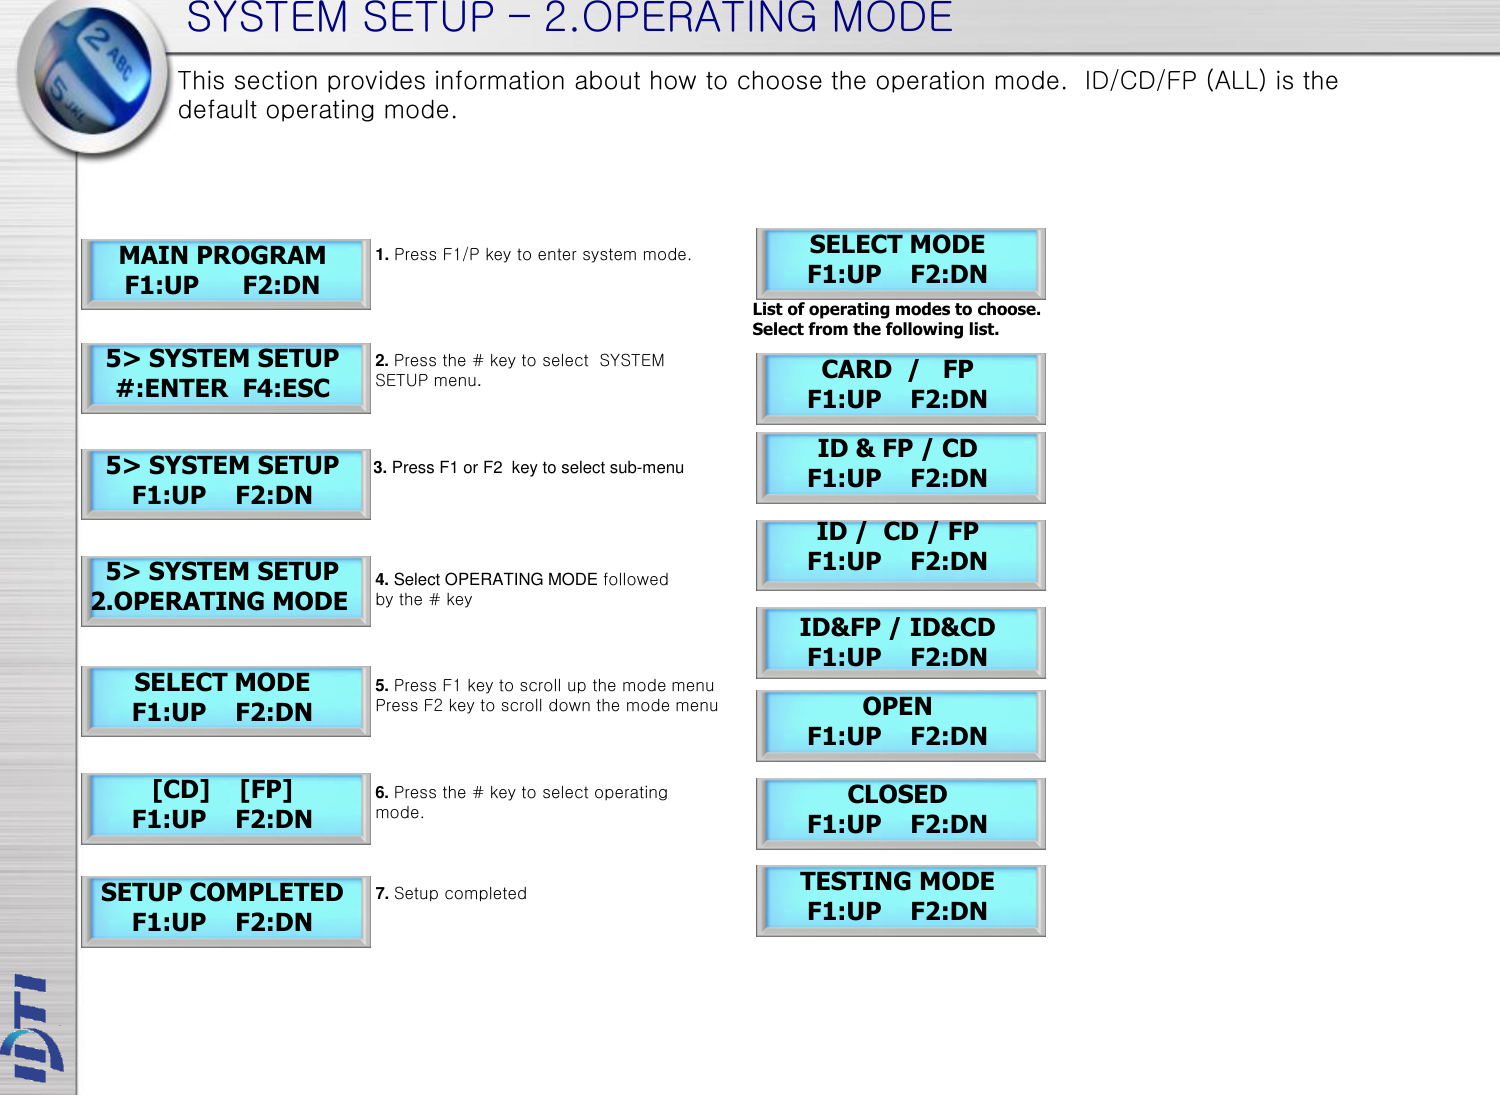 SYSTEM SETUP – 2.OPERATING MODE 5&gt; SYSTEM SETUP 2.OPERATING MODE SELECT MODE F1:UP    F2:DN [CD]    [FP] F1:UP    F2:DN SETUP COMPLETED F1:UP    F2:DN This section provides information about how to choose the operation mode.  ID/CD/FP (ALL) is the default operating mode.  SELECT MODE F1:UP    F2:DN List of operating modes to choose. Select from the following list.   MAIN PROGRAM F1:UP      F2:DN 5&gt; SYSTEM SETUP #:ENTER  F4:ESC 5&gt; SYSTEM SETUP F1:UP    F2:DN 1. Press F1/P key to enter system mode. 2. Press the # key to select  SYSTEM SETUP menu. 4. Select OPERATING MODE followed by the # key  5. Press F1 key to scroll up the mode menu   Press F2 key to scroll down the mode menu 6. Press the # key to select operating  mode.  3. Press F1 or F2  key to select sub-menu 7. Setup completed OPEN F1:UP    F2:DN CARD  /   FP F1:UP    F2:DN ID &amp; FP / CD  F1:UP    F2:DN CLOSED F1:UP    F2:DN ID&amp;FP / ID&amp;CD F1:UP    F2:DN ID /  CD / FP F1:UP    F2:DN TESTING MODE F1:UP    F2:DN 